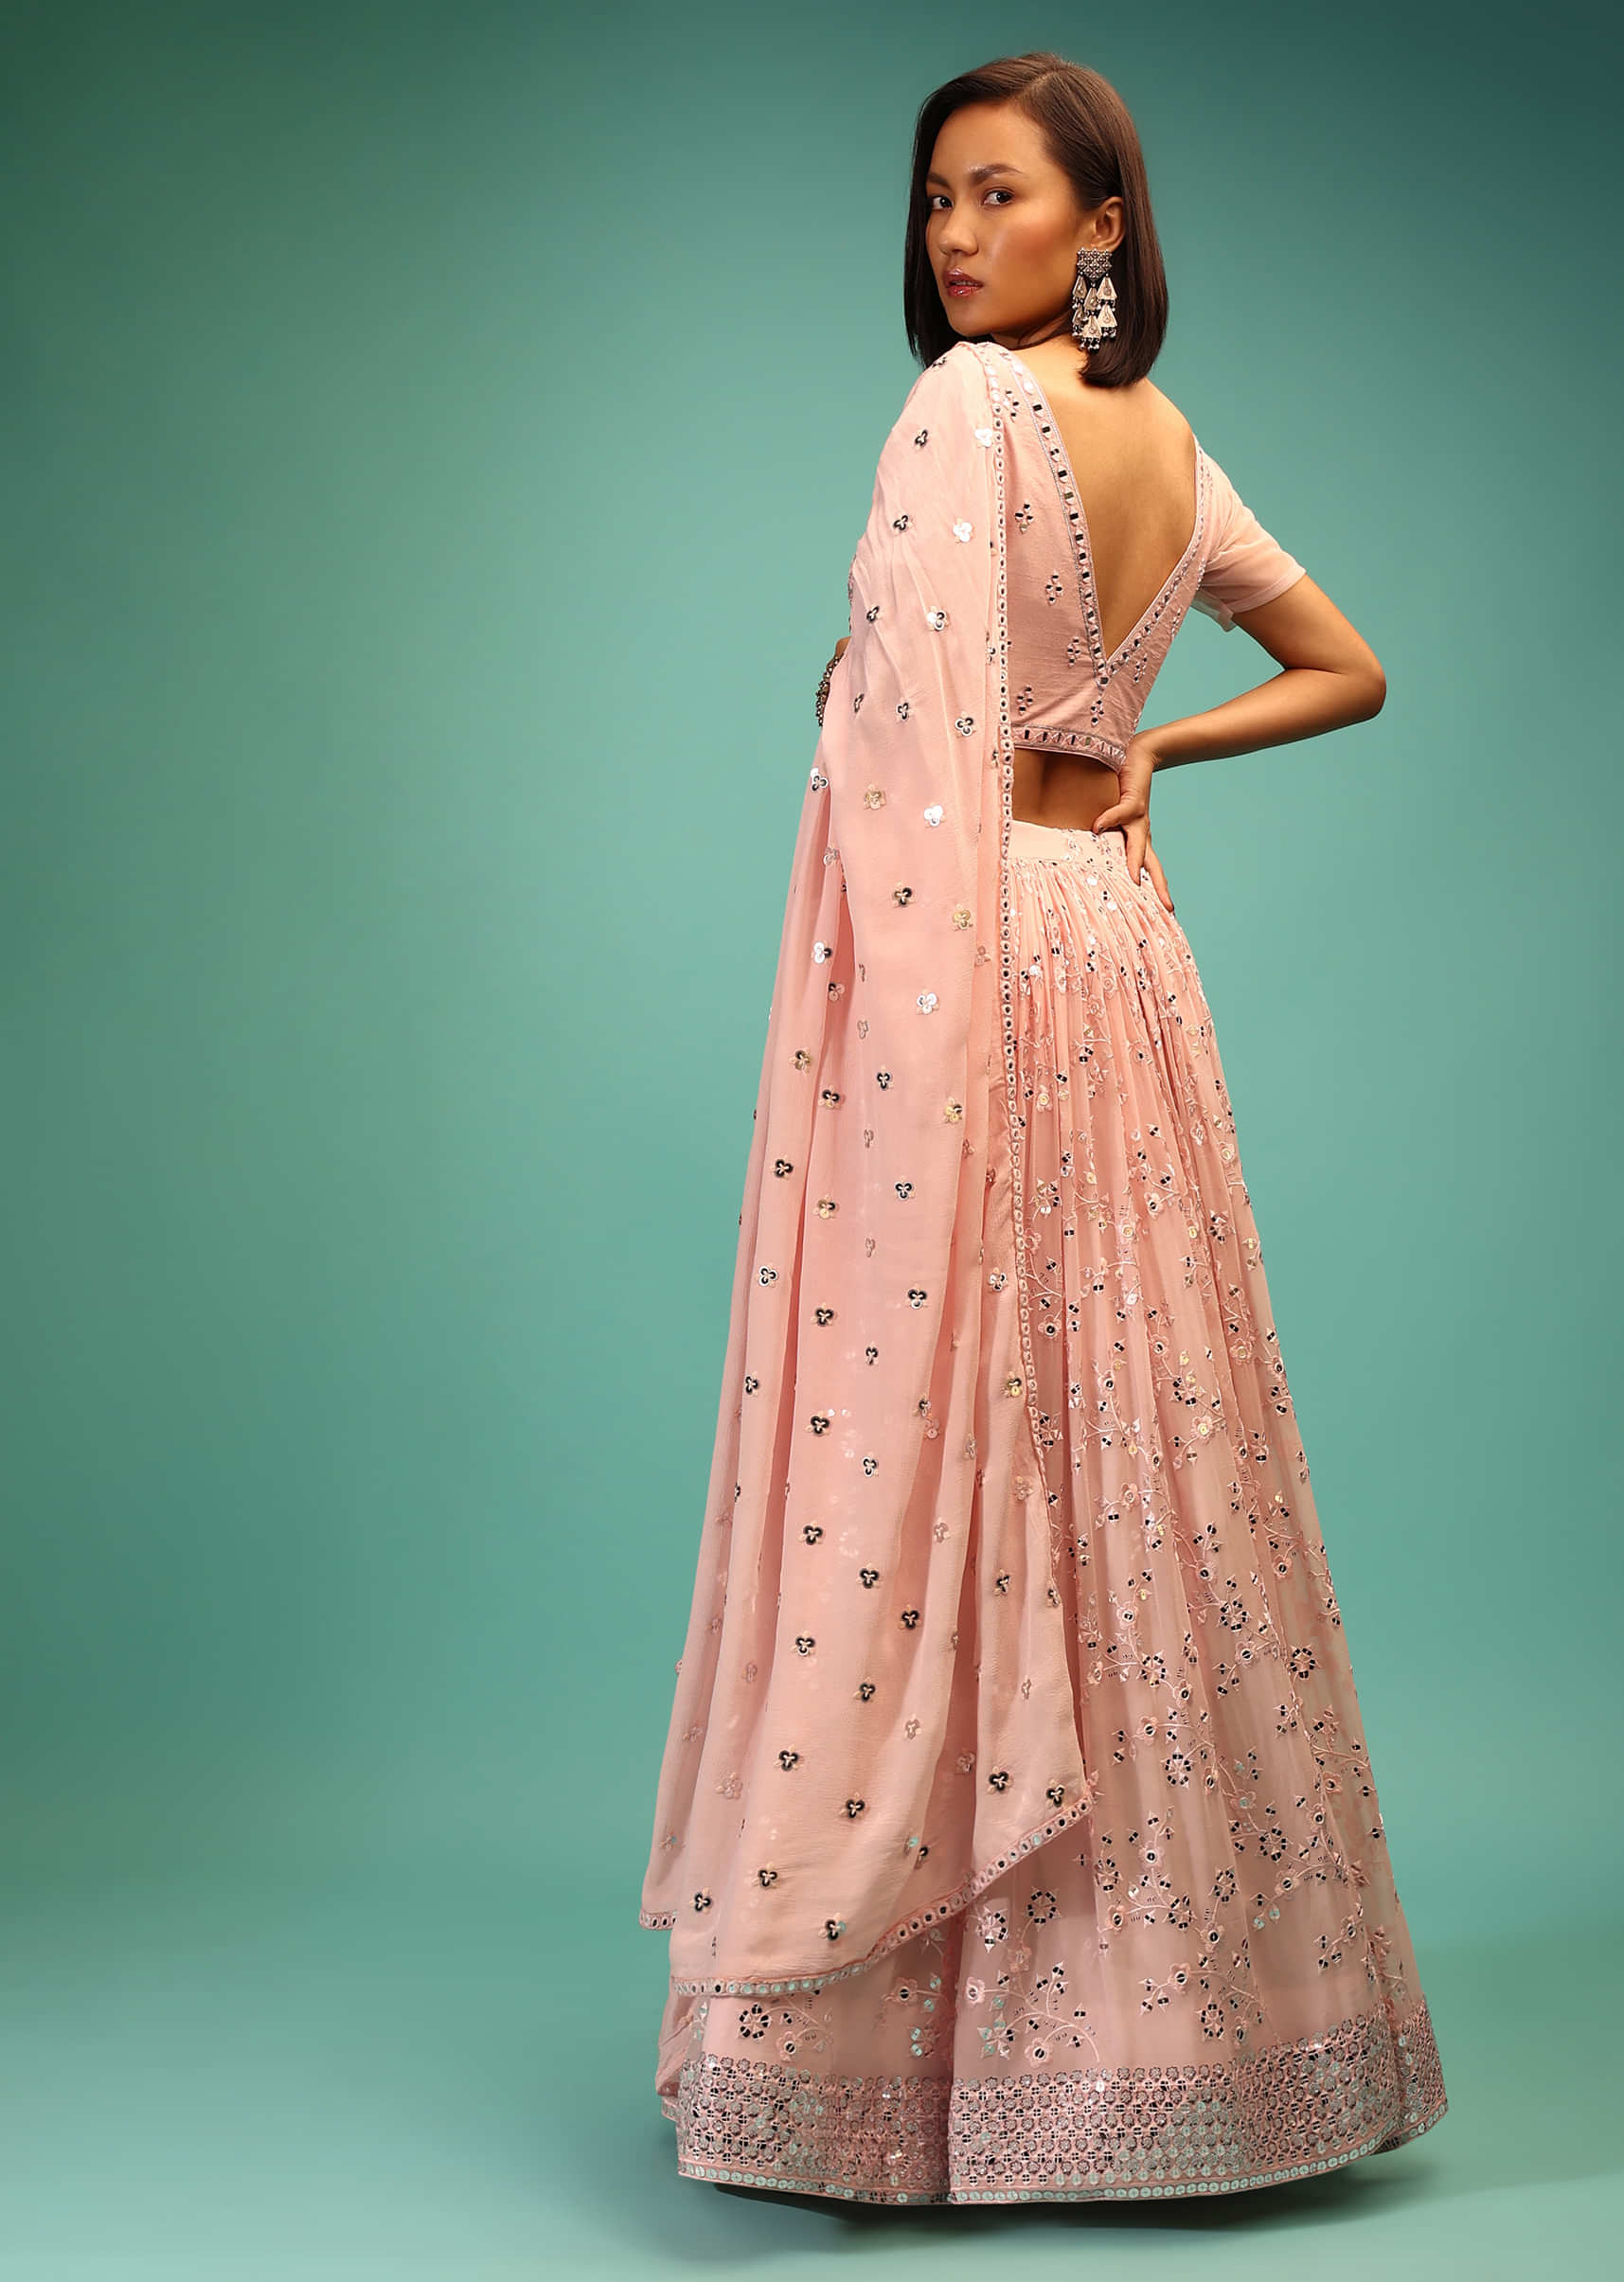 Pastel Pink Lehenga Choli In Georgette With Sequins And Mirrored Work 